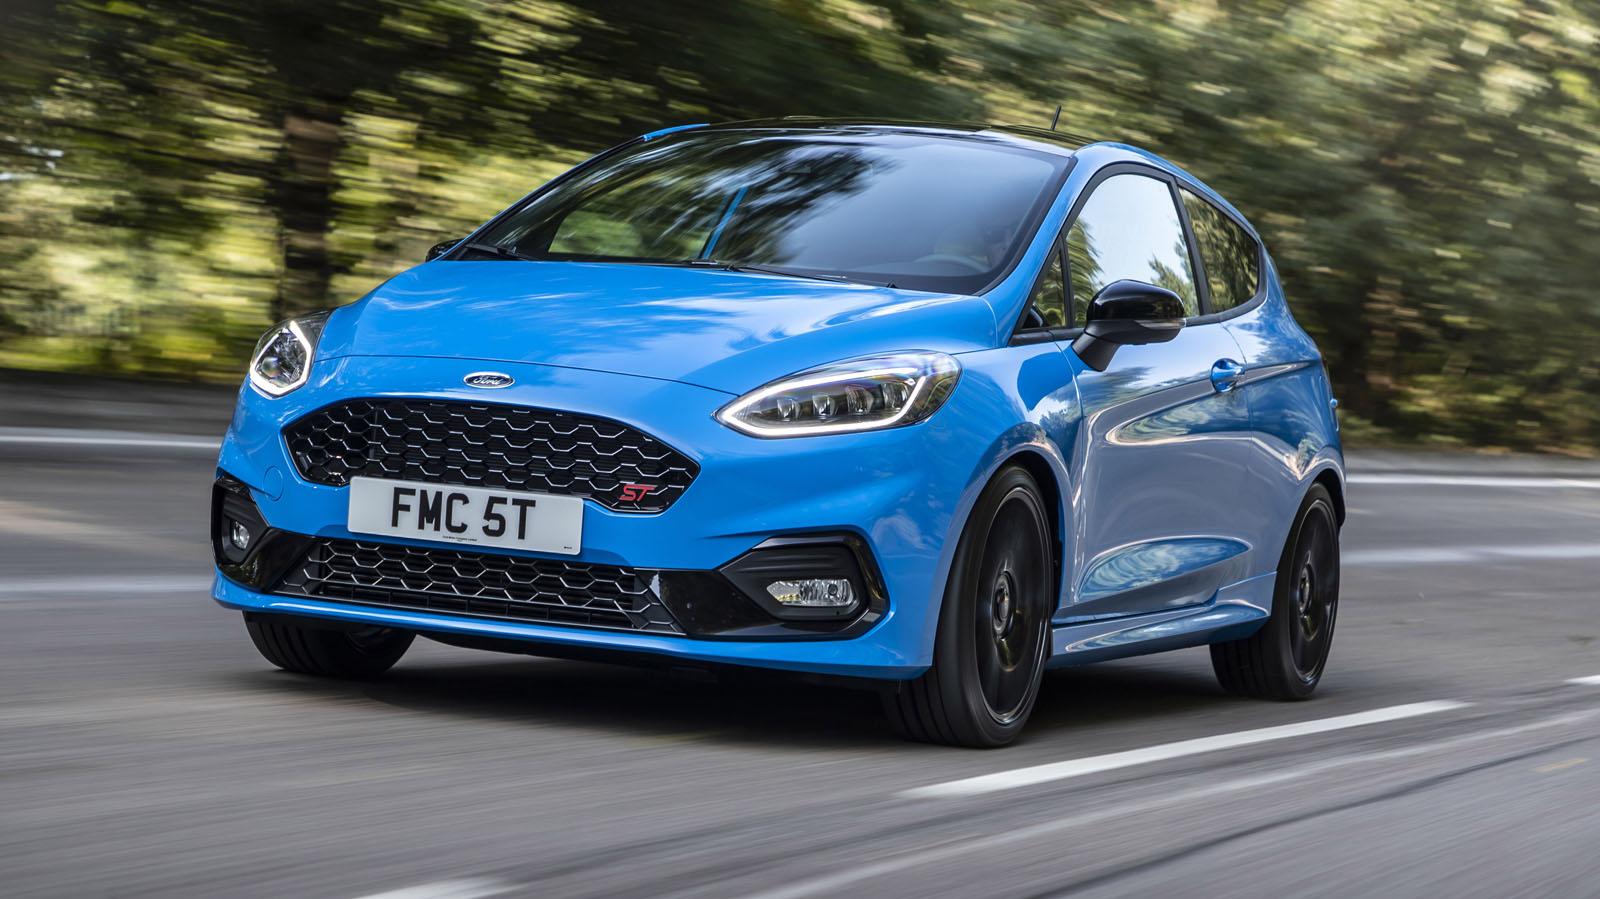 Say hello to the Ford Fiesta ST Edition Top Gear